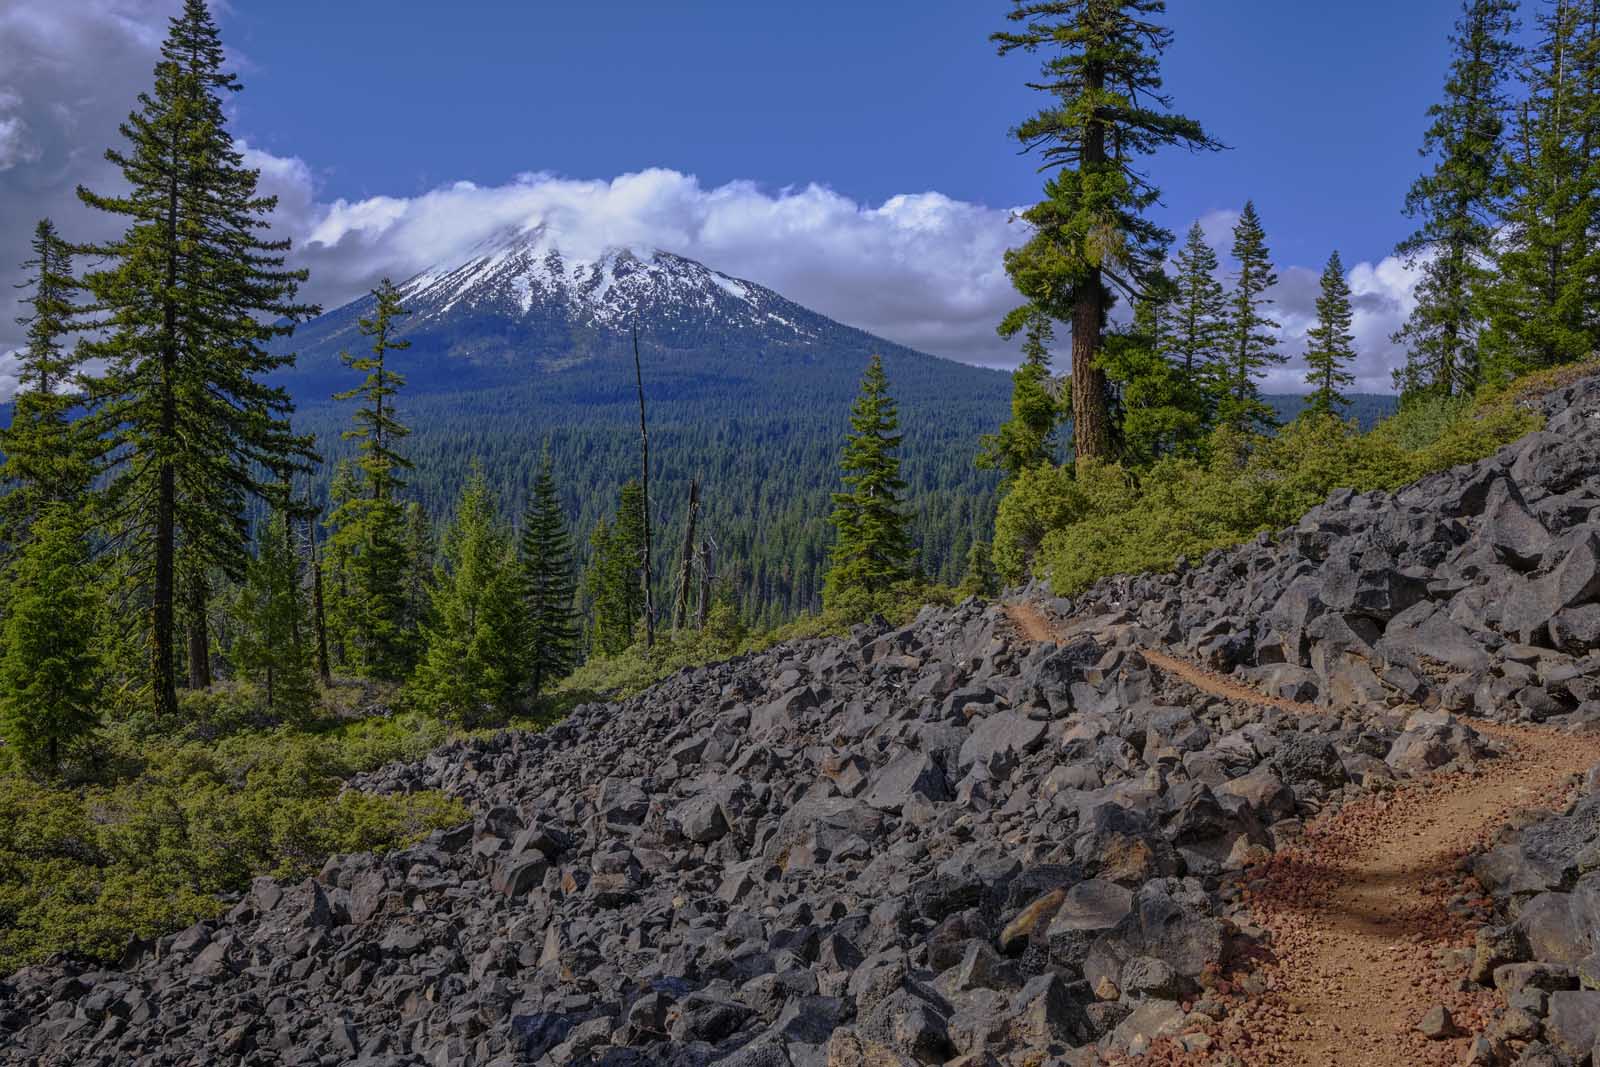 Views on the Pacific Crest Trail in Oregon